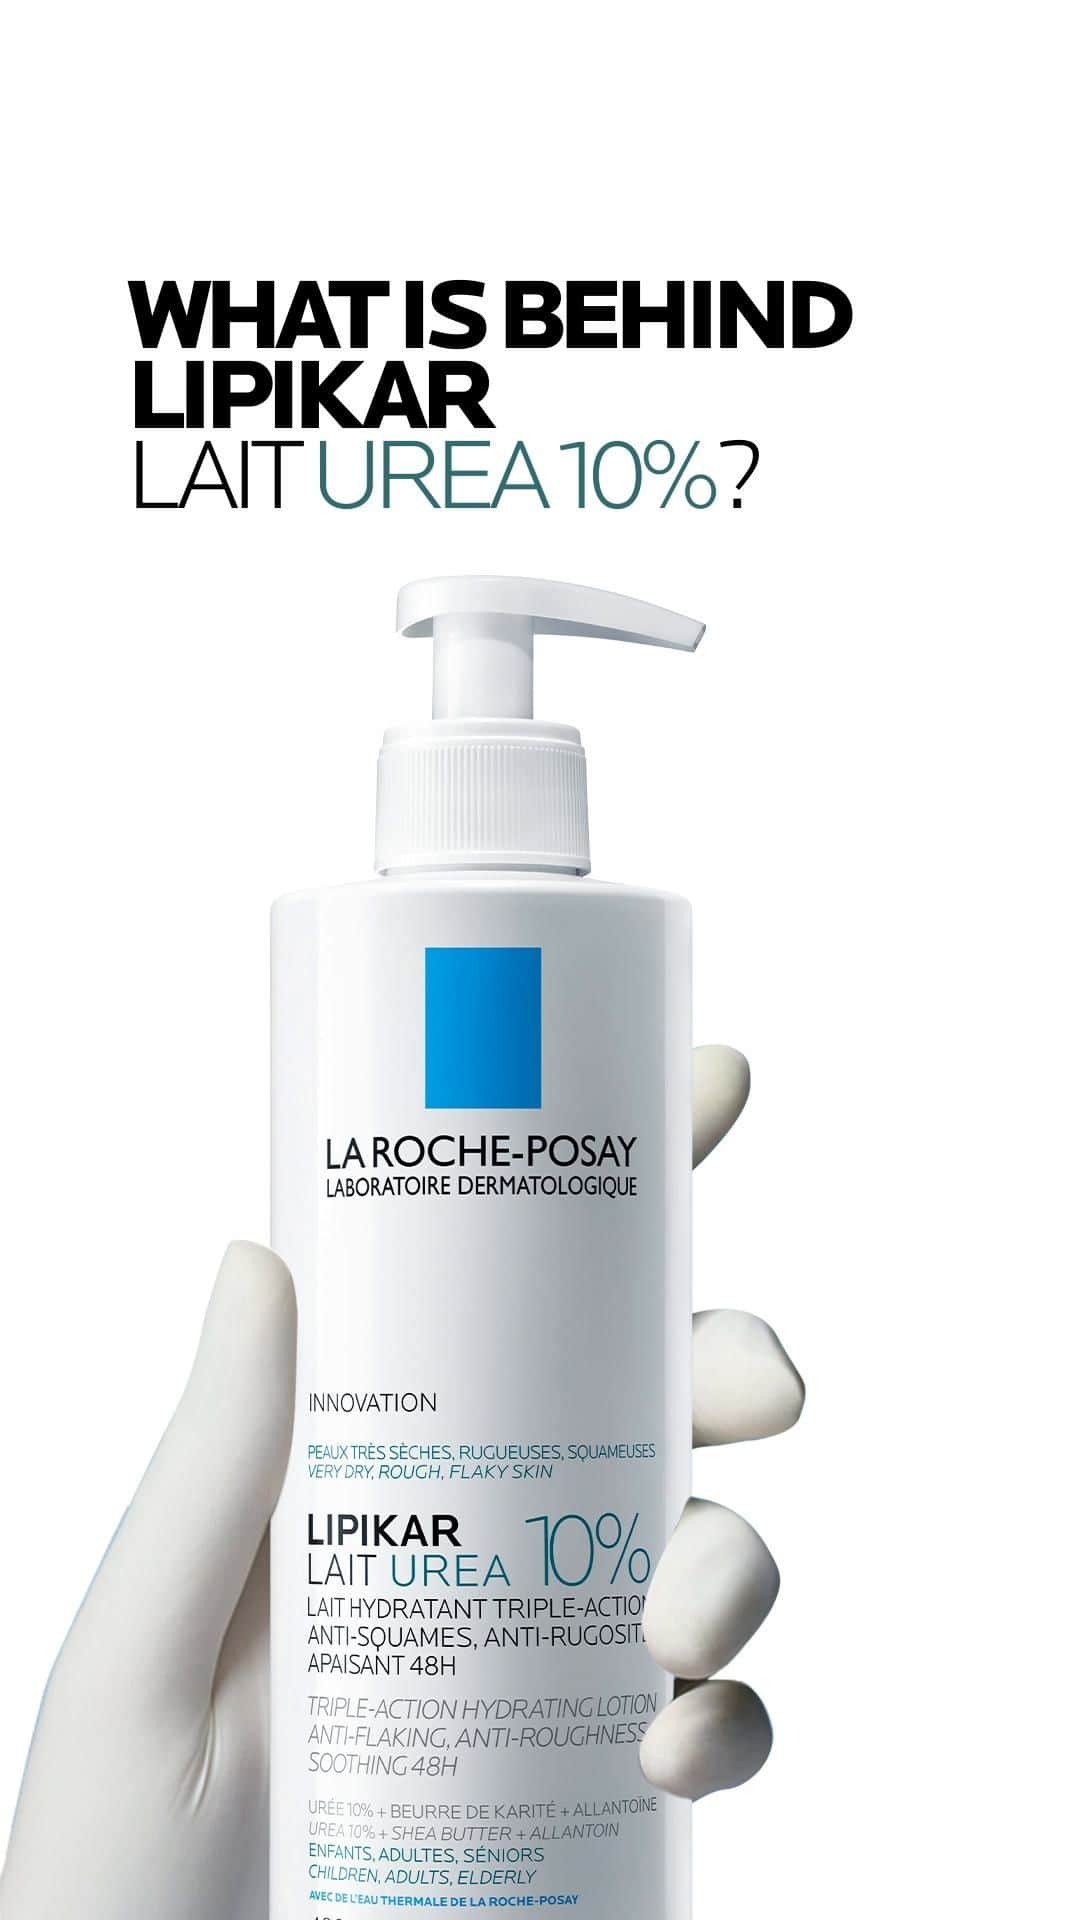 La Roche-Posayのインスタグラム：「Introducing the solution for all dry skin: Lipikar Lait Urea 10% with urea, hepes and shea butter.  ✅ Instant anti-flaking ✅ Anti-roughness  ✅ 48h anti-irritation*   Already your favourite bathroom shelf product? 🛁 Tell us what you think below 👇  All languages spoken here! Feel free to talk to us at anytime. #larocheposay #lipikar #sensitiveskin #dryskin  Global official page from La Roche-Posay, France.   *Instrumental test, 24 volunteers after 1 application.」